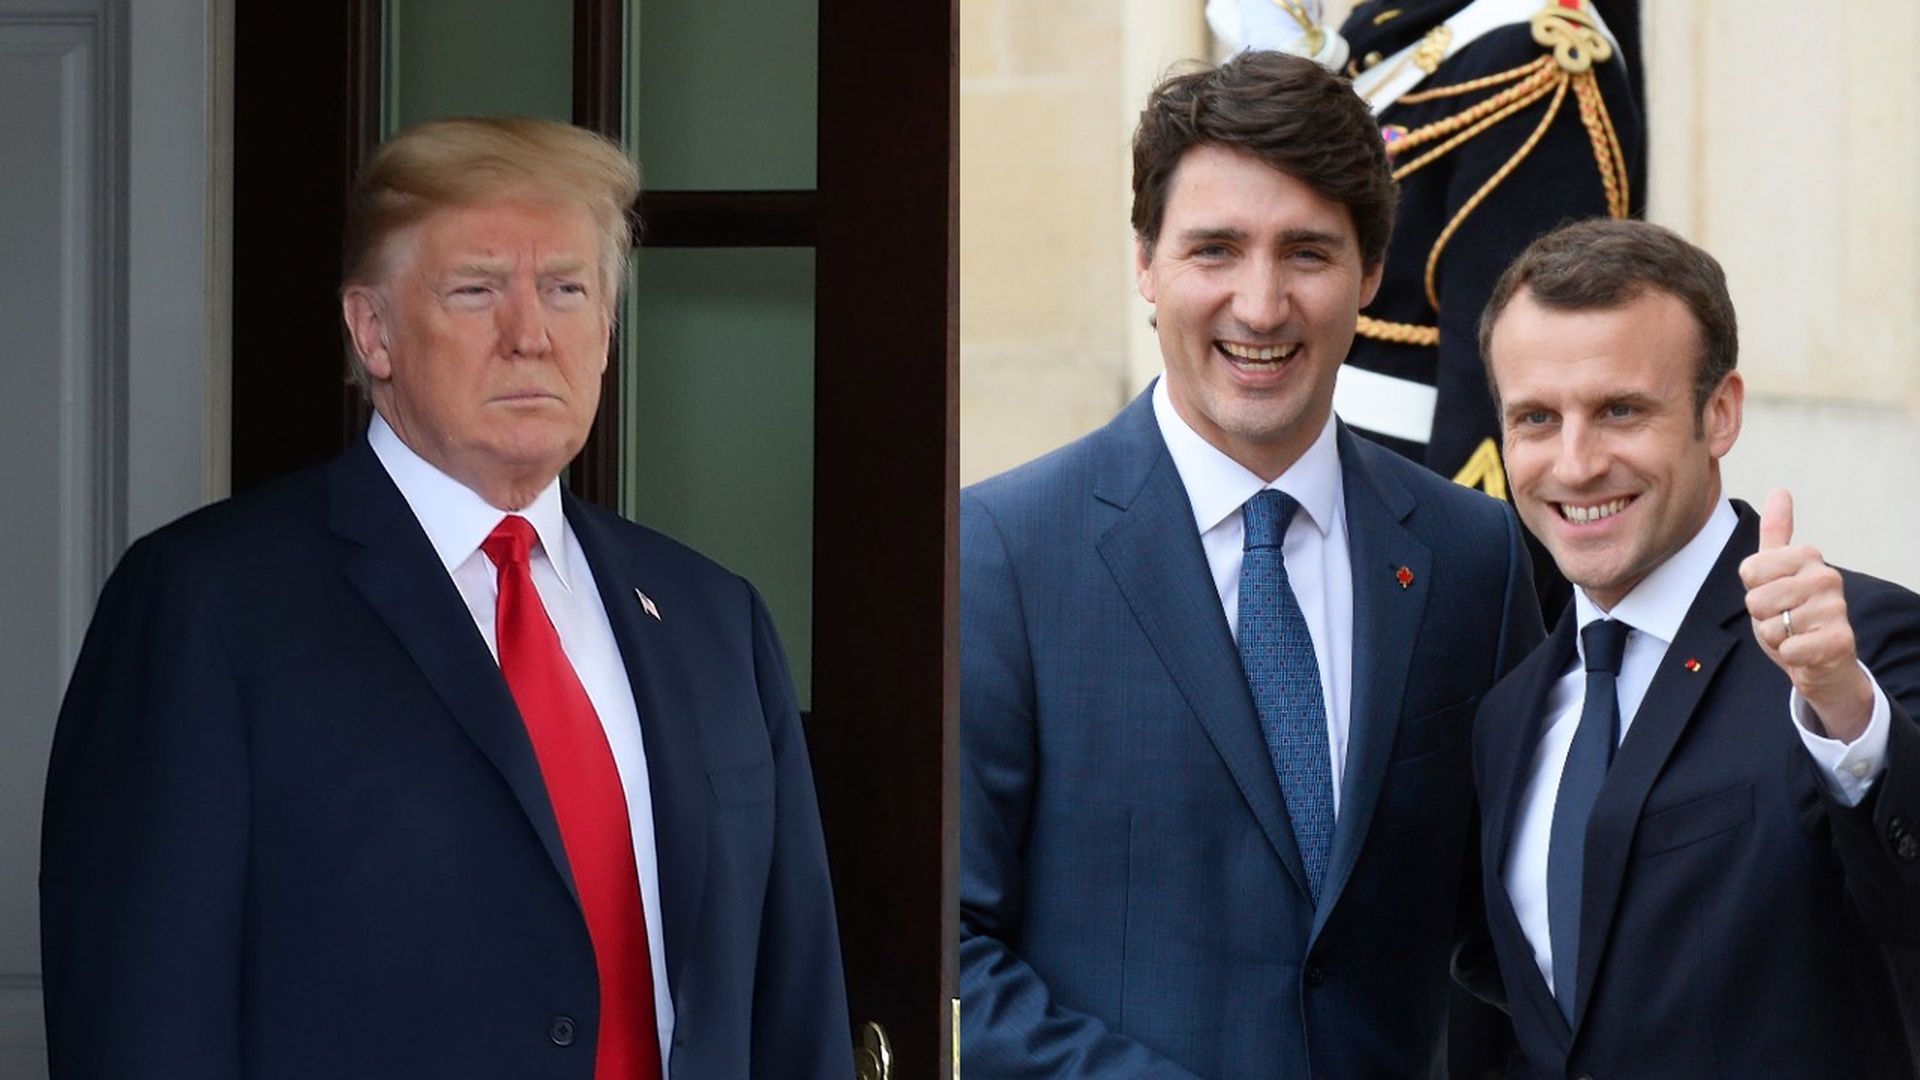 President Trump, and Justin Trudeau with Emmanuel Macron.